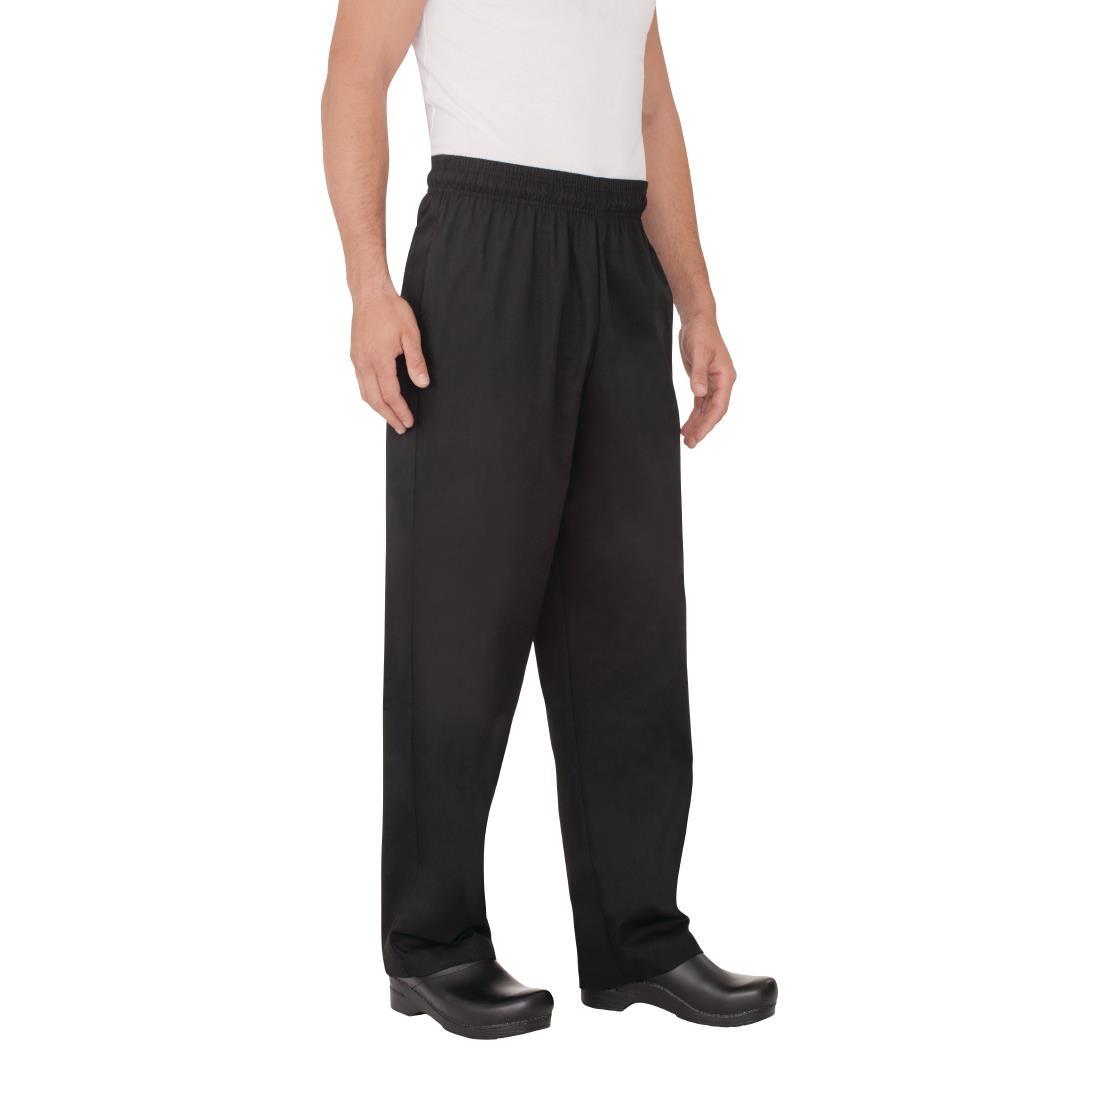 Chef Works Essential Baggy Trousers Black 4XL - A029-4XL  - 4